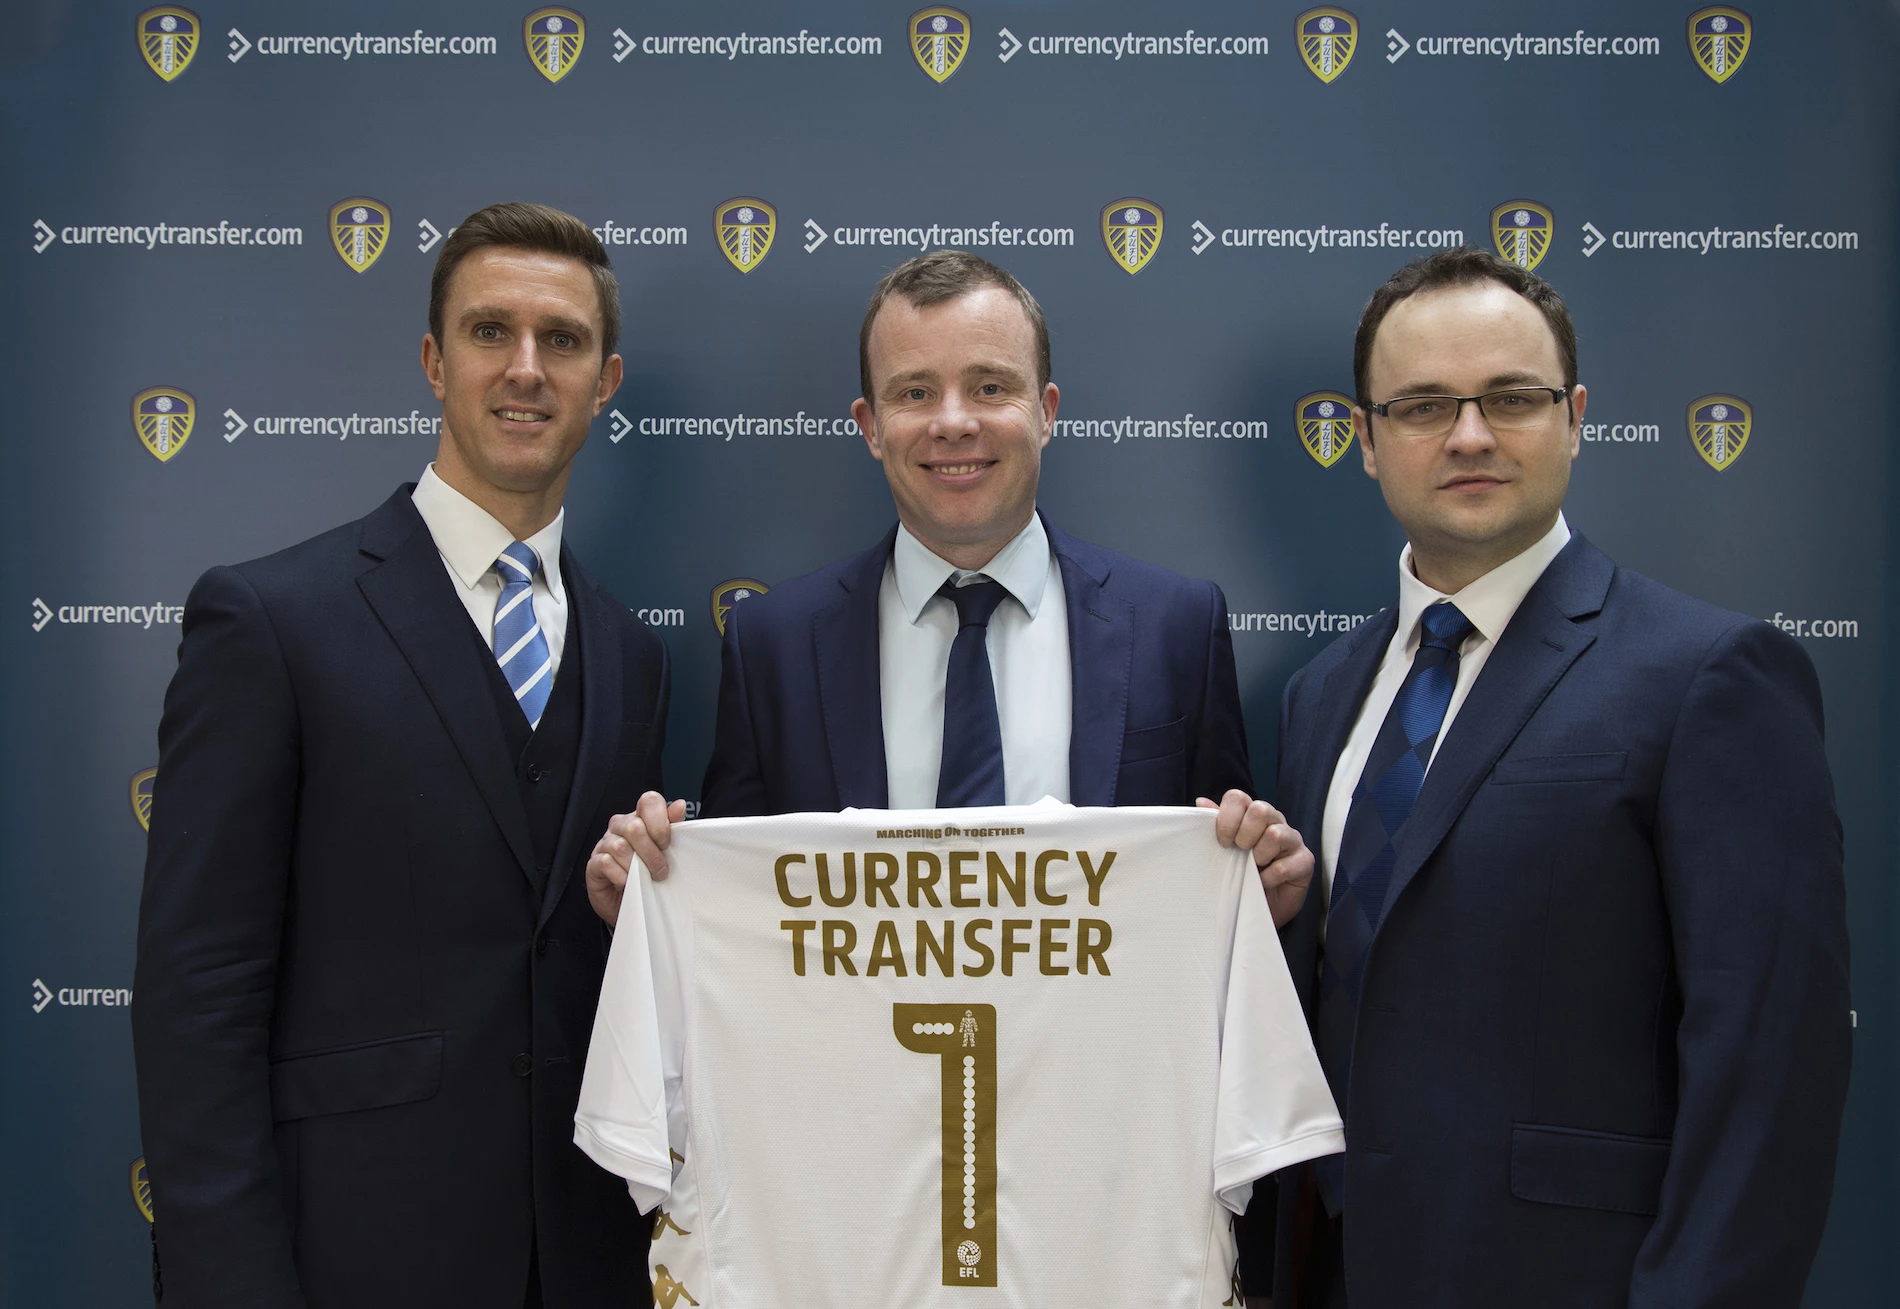 Paul Plewman, COO, CurrencyTransfer.com (left), Angus Kinnear, Managing Director, Leeds United (middle), Stevan Litobac, Co-Founder, CurrencyTransfer.com (right).